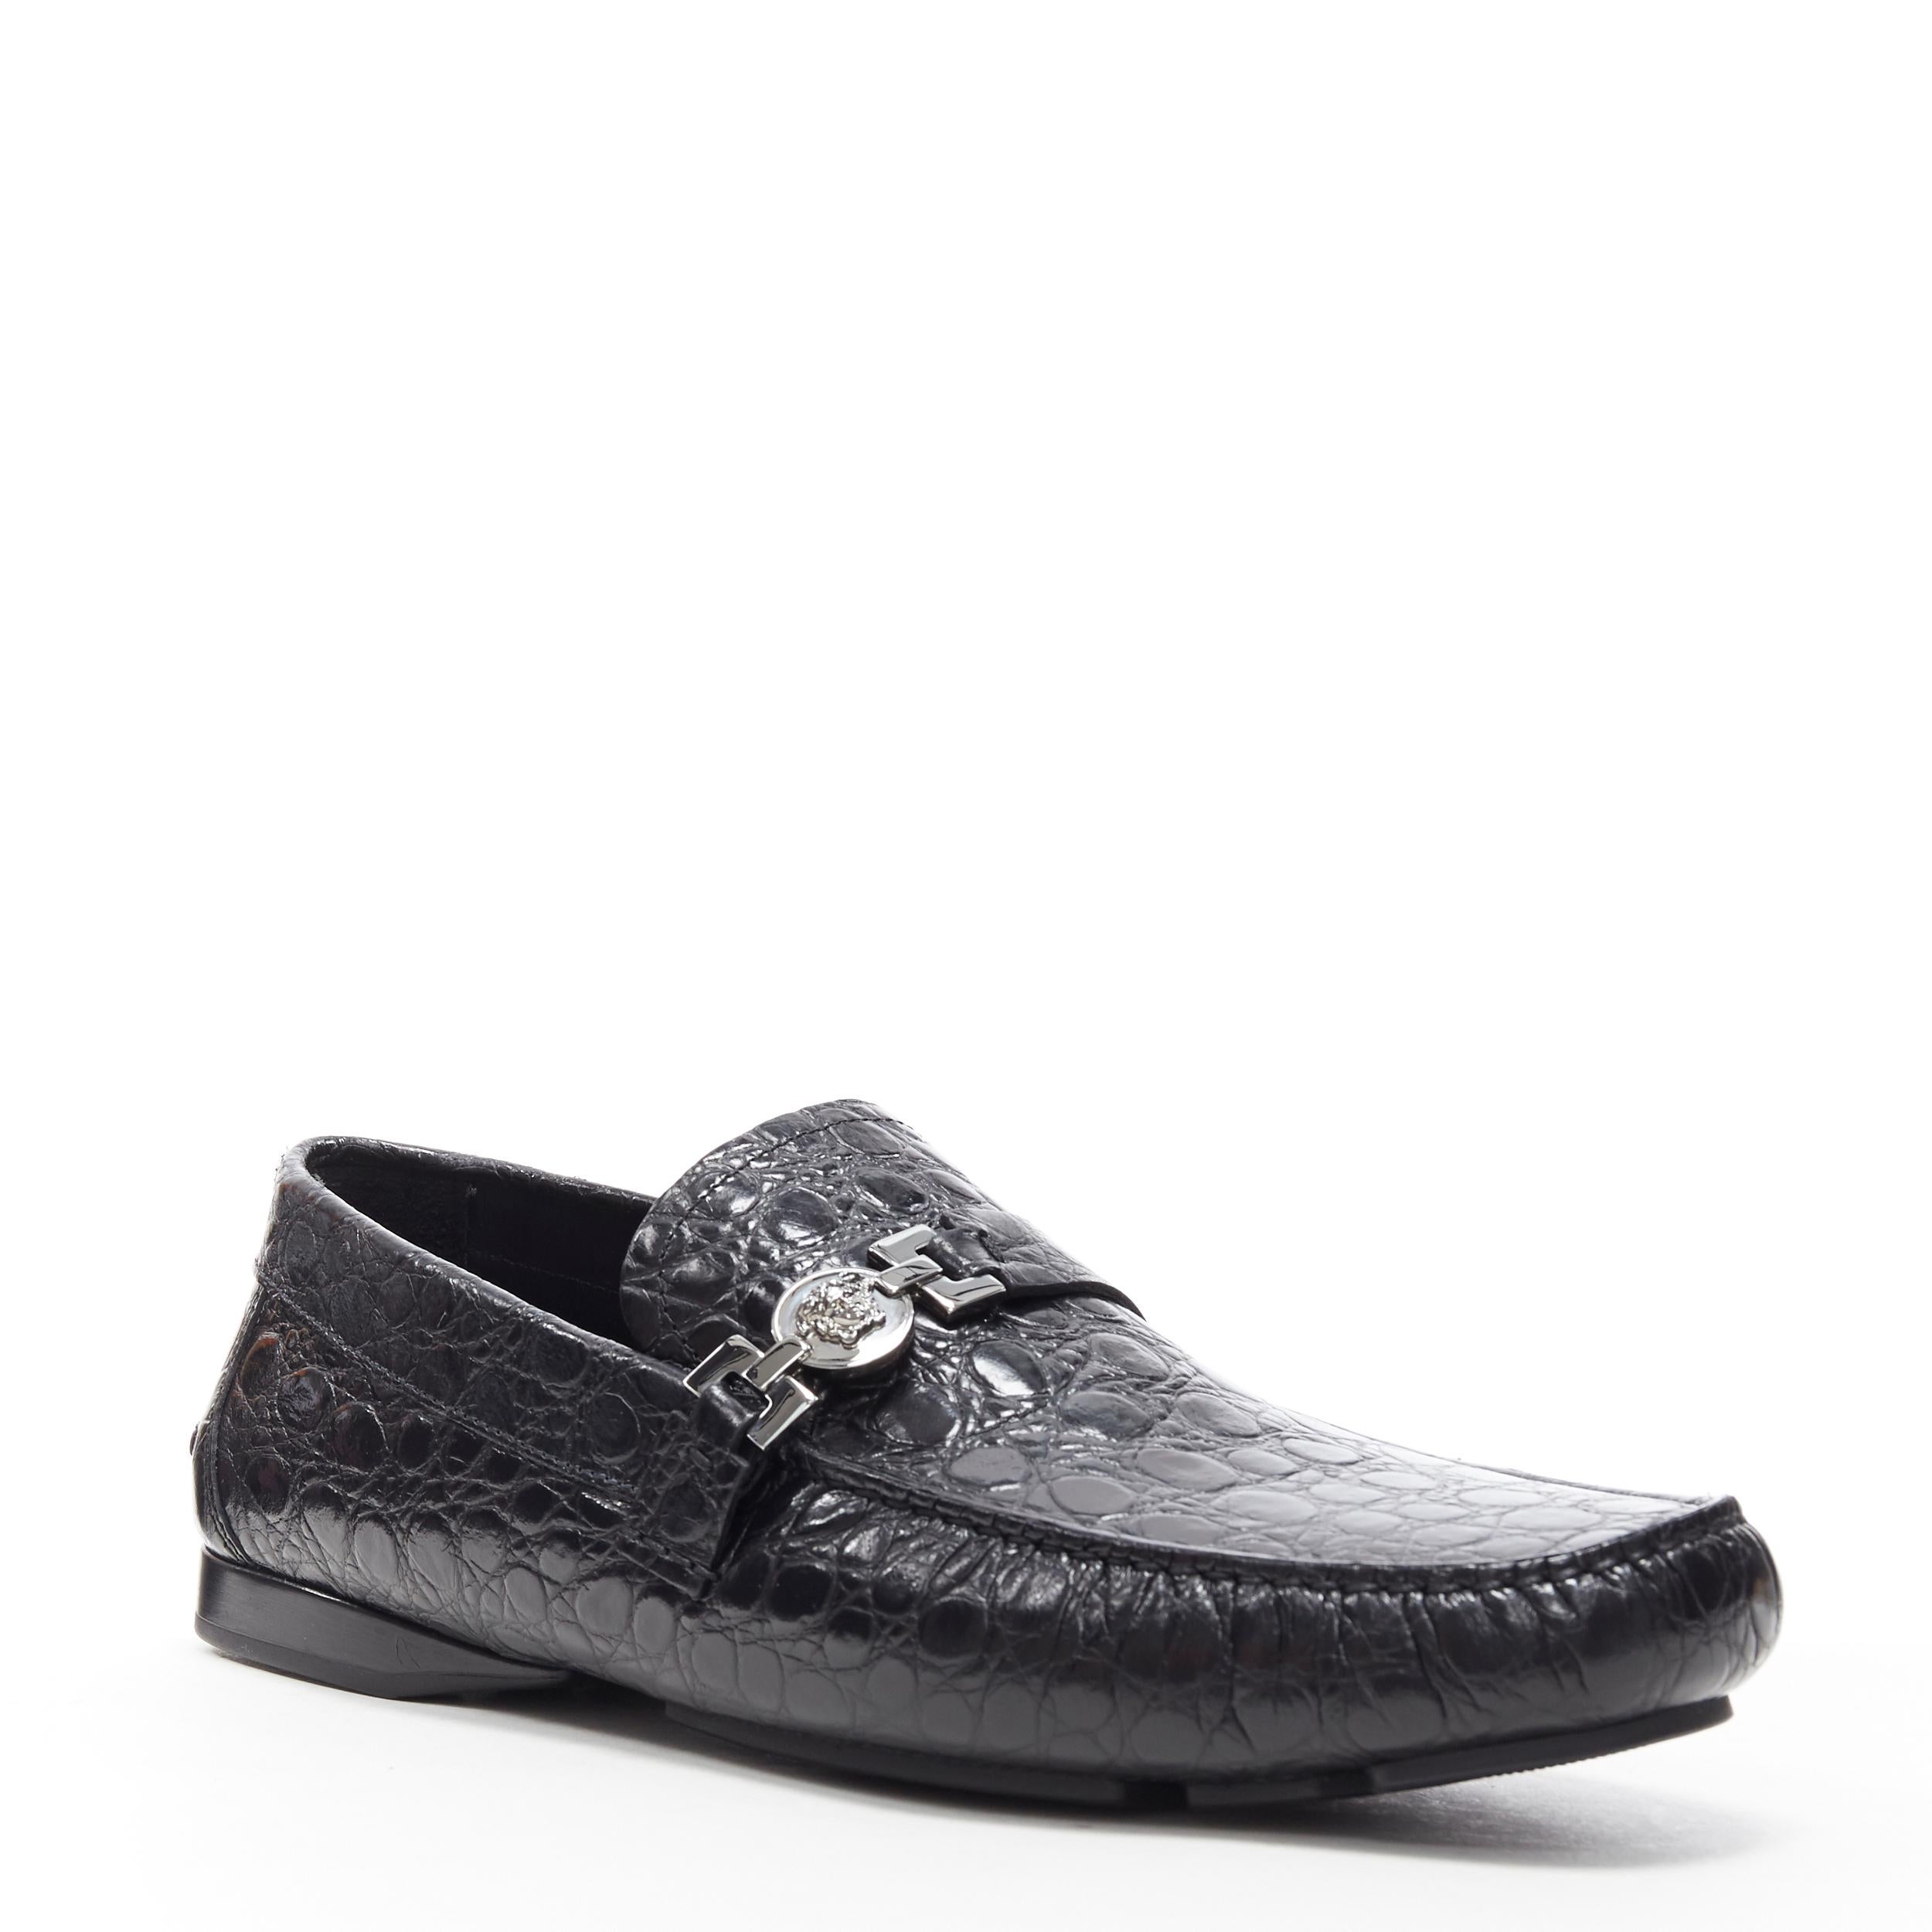 new VERSACE black mock croc leather silver Medusa strapped car shoe loafer EU44
Brand: Versace
Designer: Donatella Versace
Model Name / Style: Car shoes
Material: Leather; calf leather
Color: Black
Pattern: Solid
Closure: Slip on
Lining material: